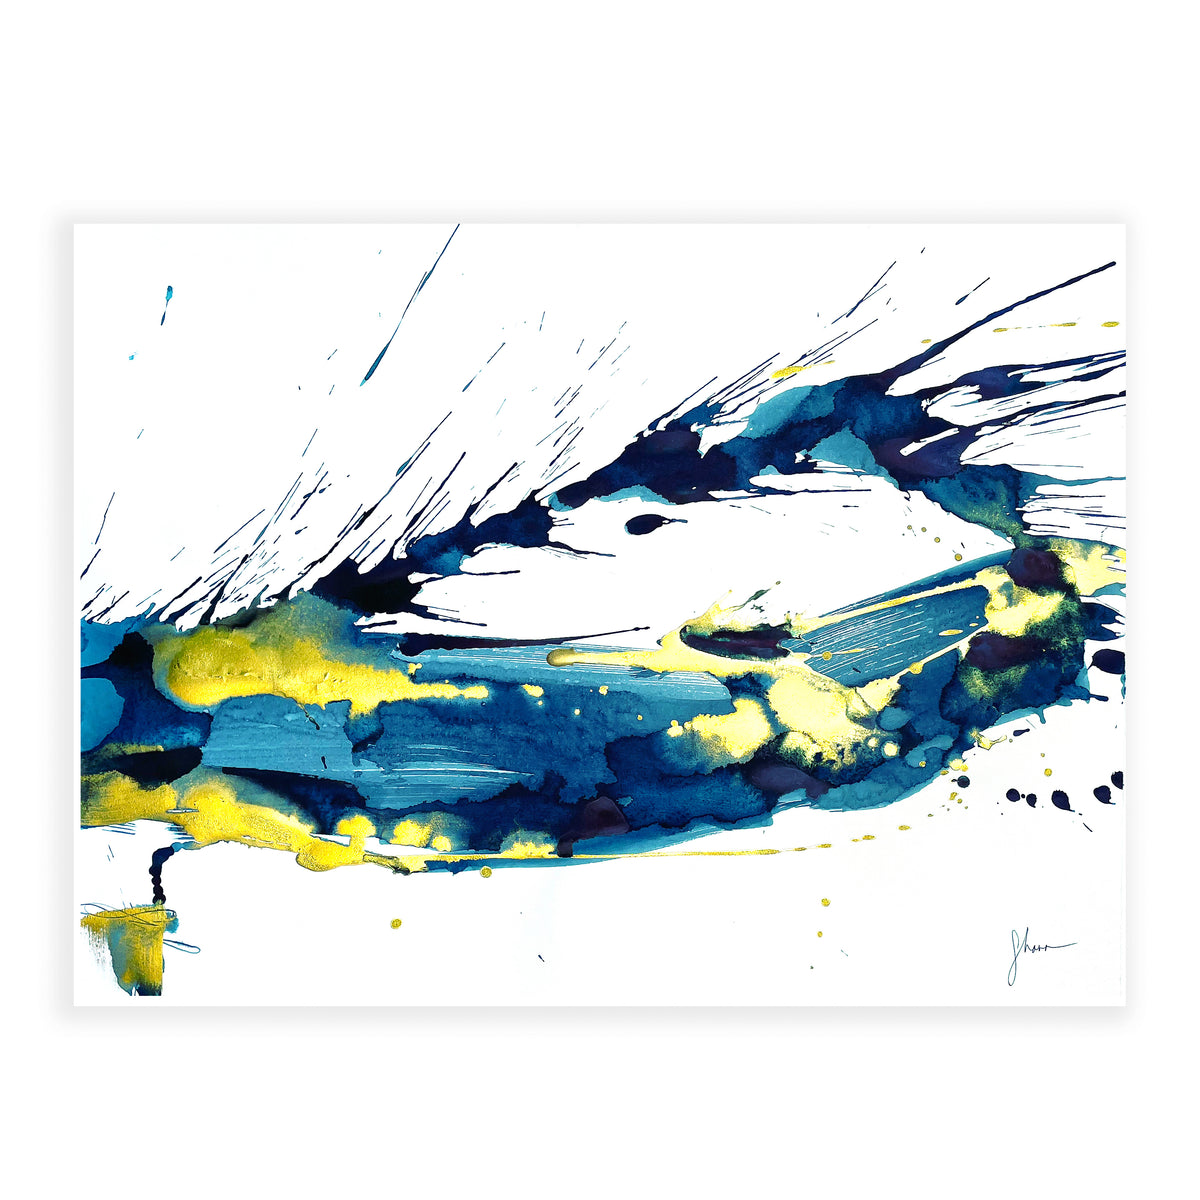 An original abstract painting illustrating brush strokes and splatter featuring blue hues and gold detail painted with watercolor on a soft white background